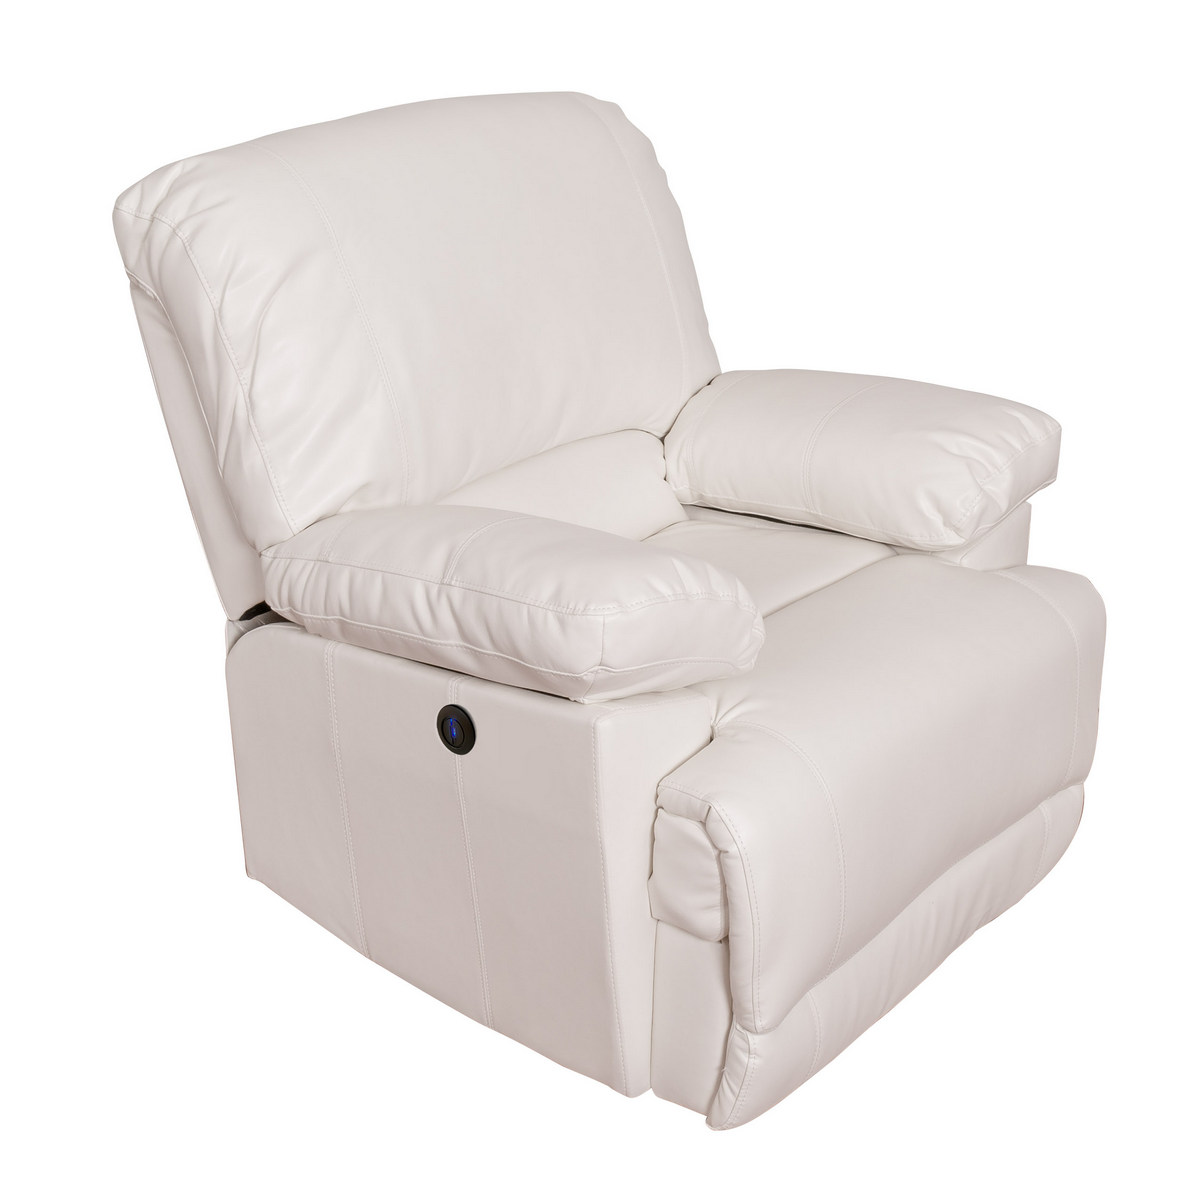 CorLiving LZY-312-R Lea White Bonded Leather Power Recliner with USB Port - CorLiving Recliners